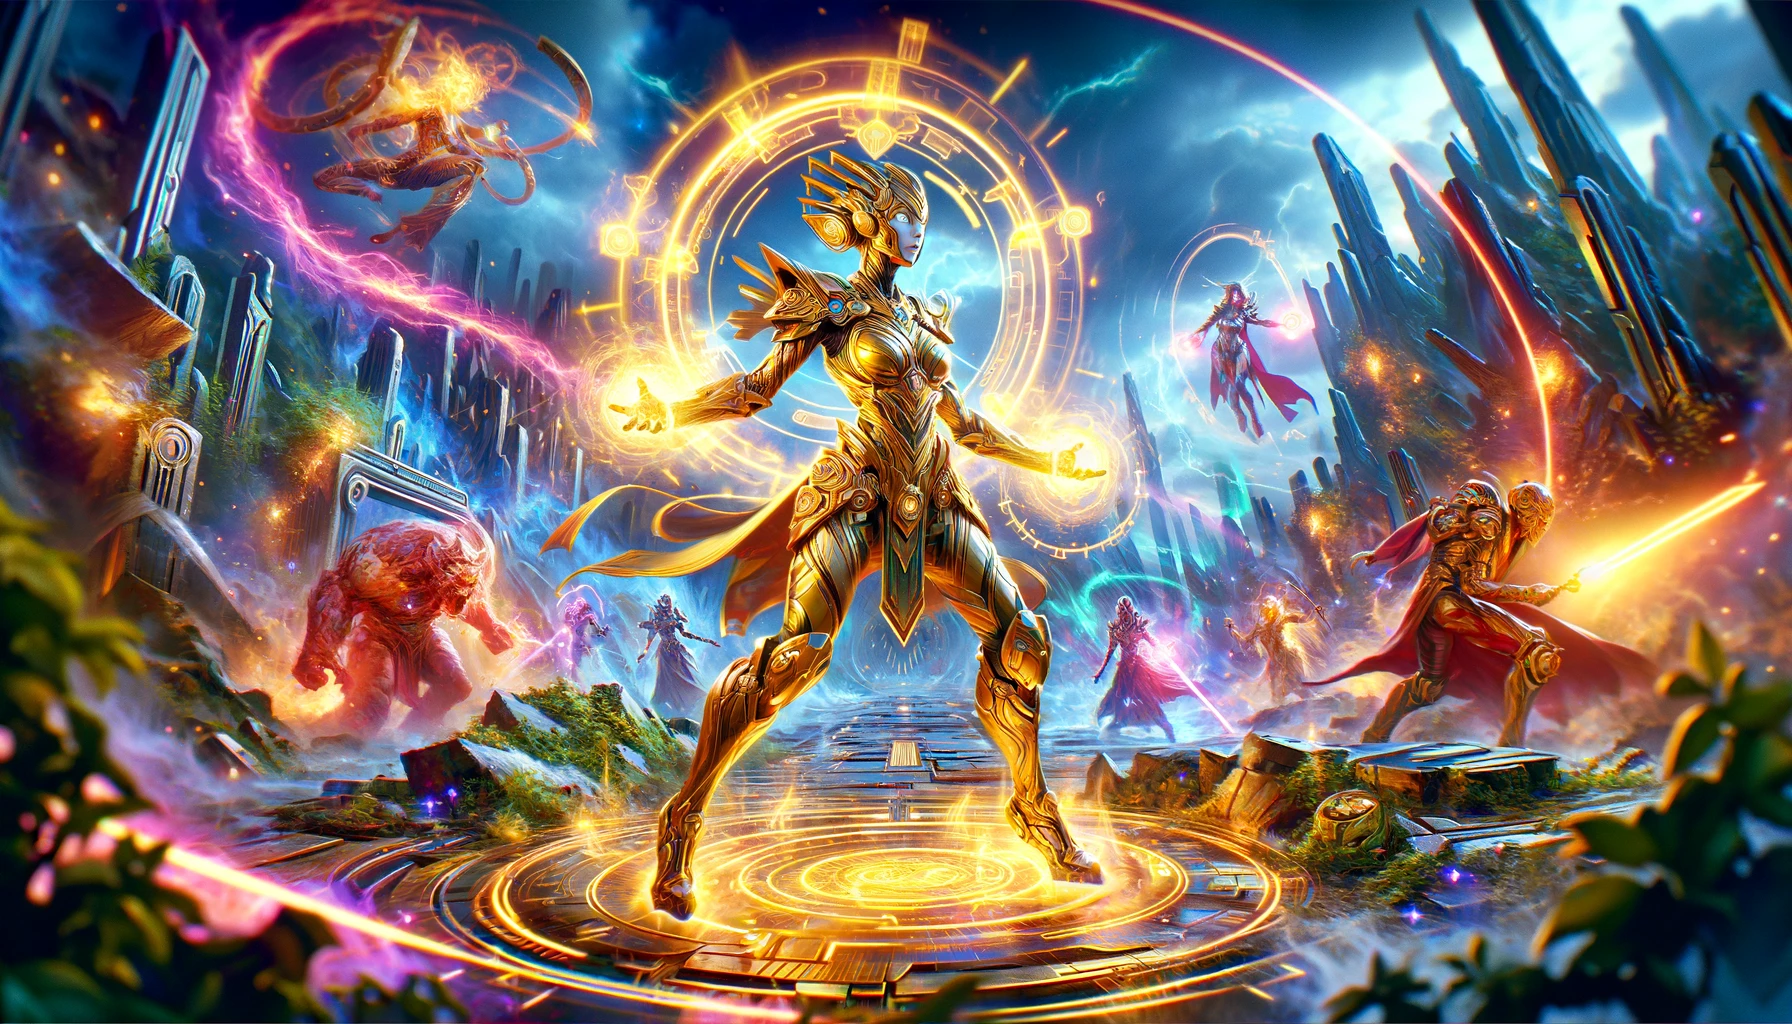 A dynamic, colorful scene of Thena in Marvel Snap, showcasing her ability in a fantastical setting with other cards and effects in play.